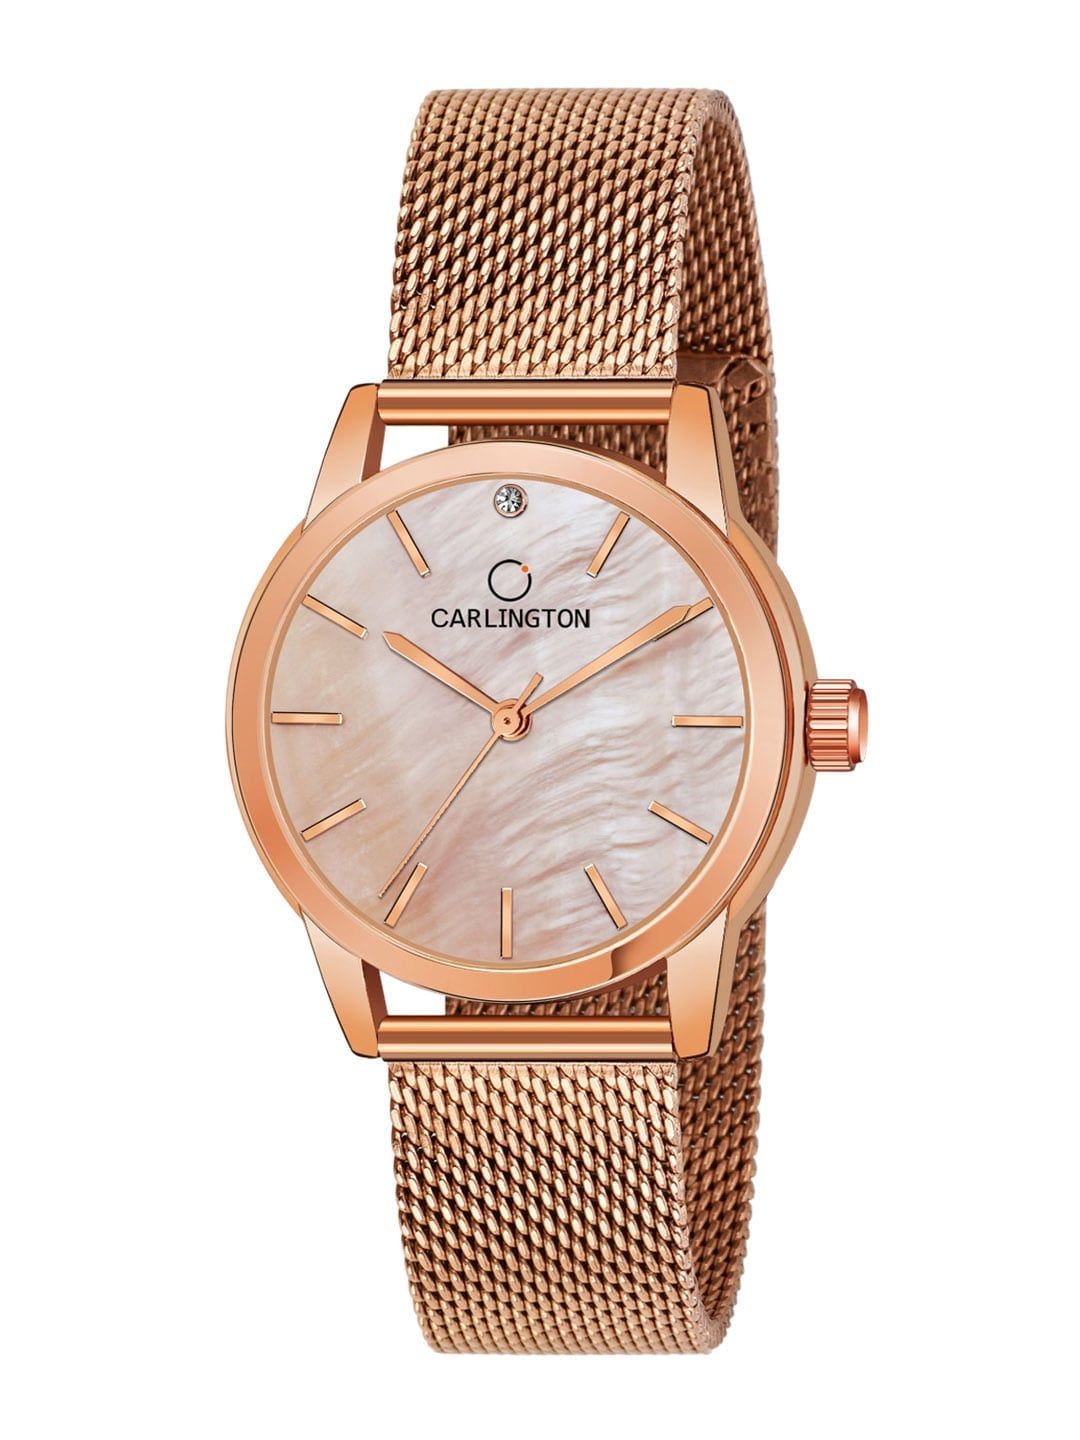 CARLINGTON Women Rose Gold-Toned Dial Stainless Steel Bracelet Analogue Watch CT2010 Price in India